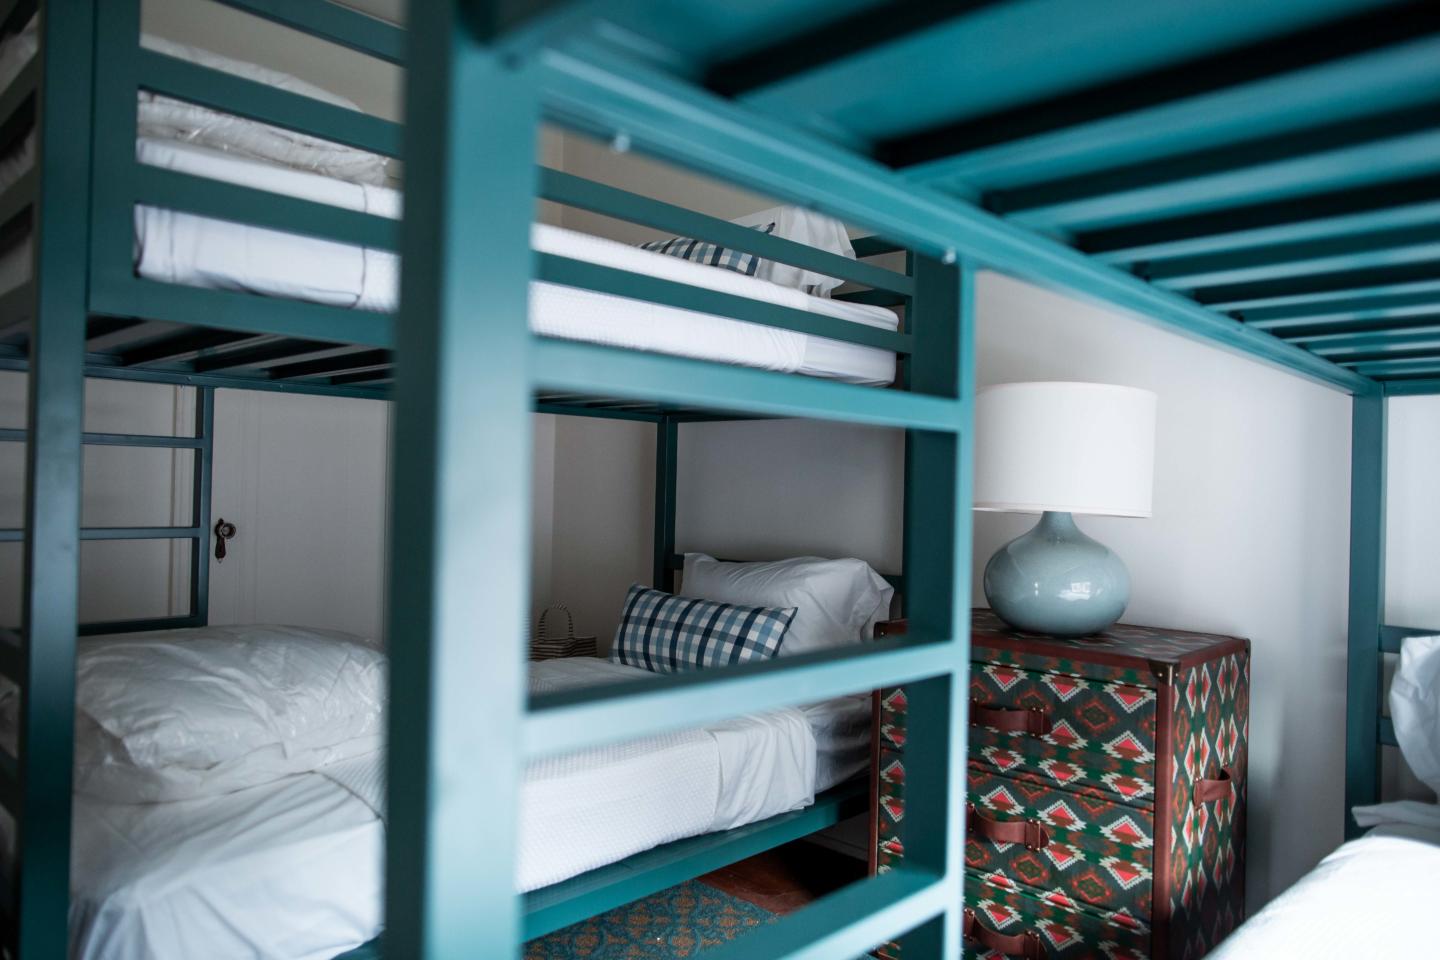 Bunk beds in supportive housing space built by Morgan Li 